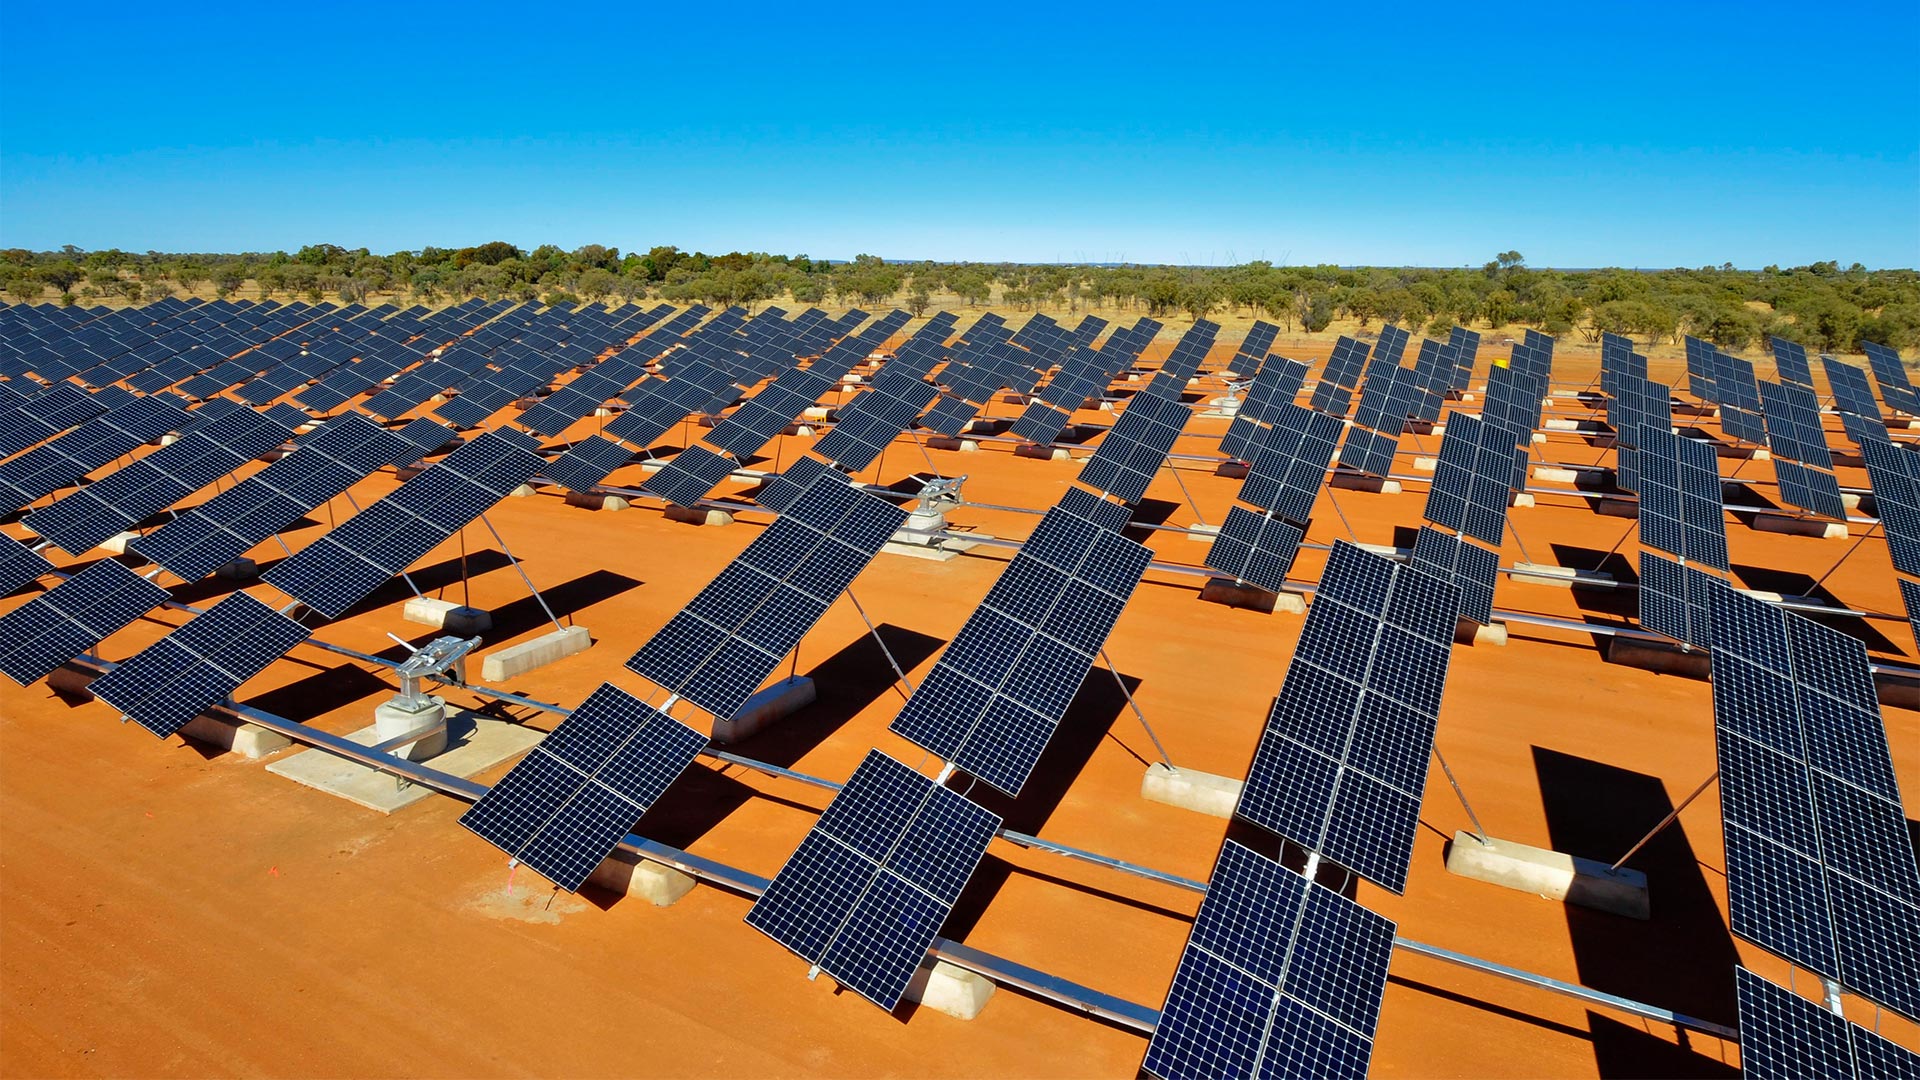 Uterne Solar Power Station, Alice Springs, Northern Territory, Australien | picture alliance / dpa